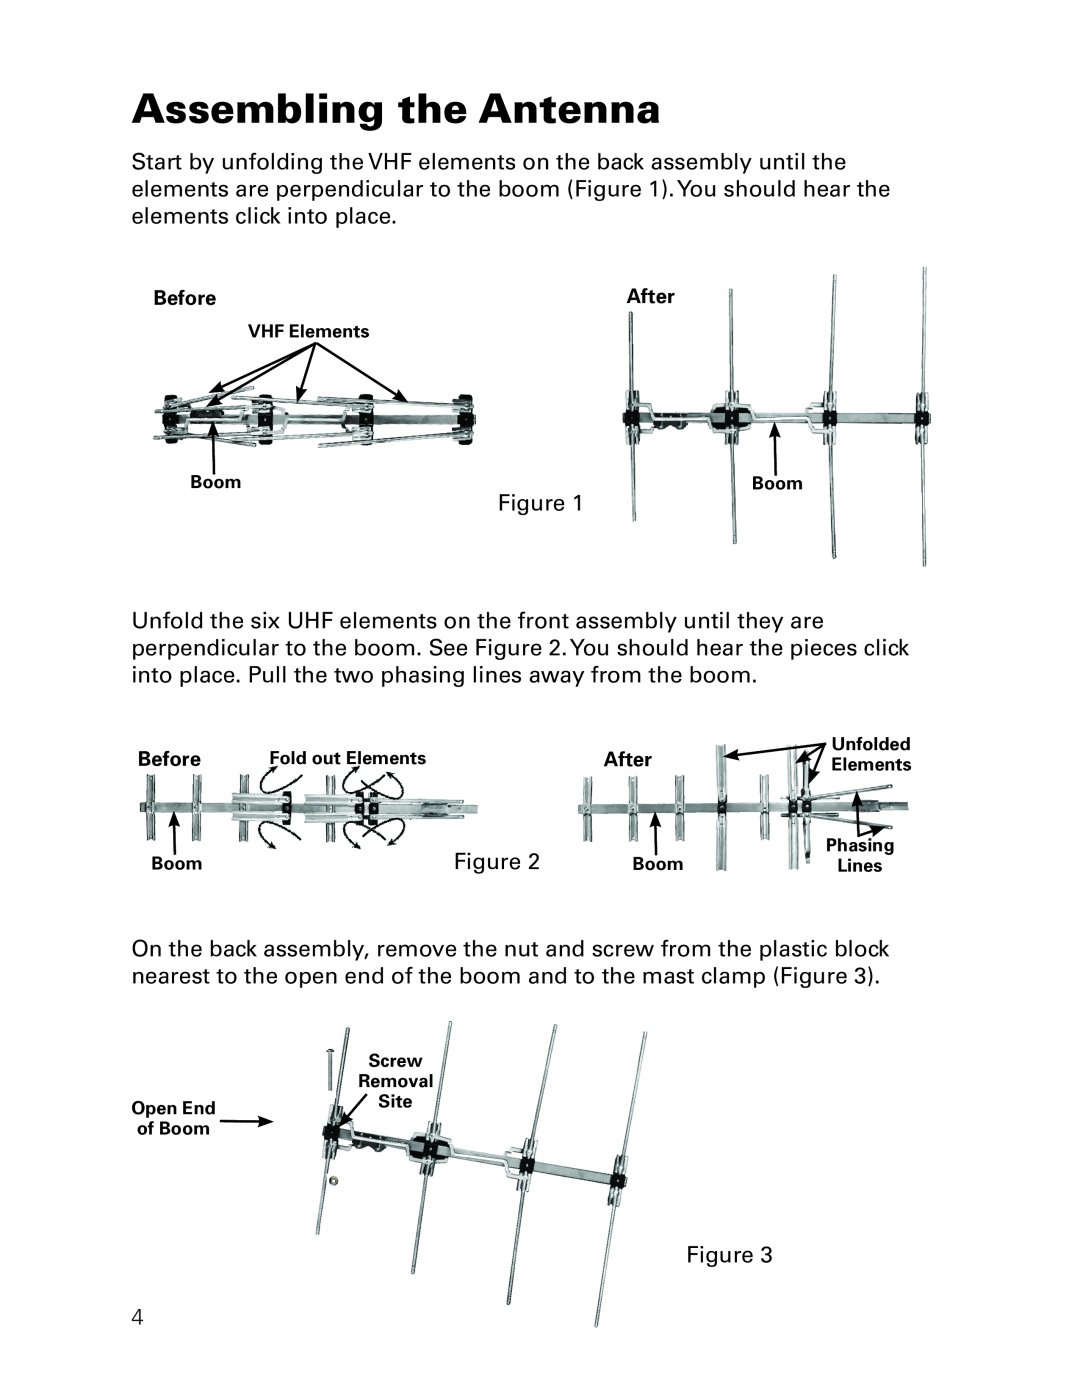 RCA ANT3037X installation manual Assembling the Antenna, Boom, Unfolded, Elements, Phasing, Lines 